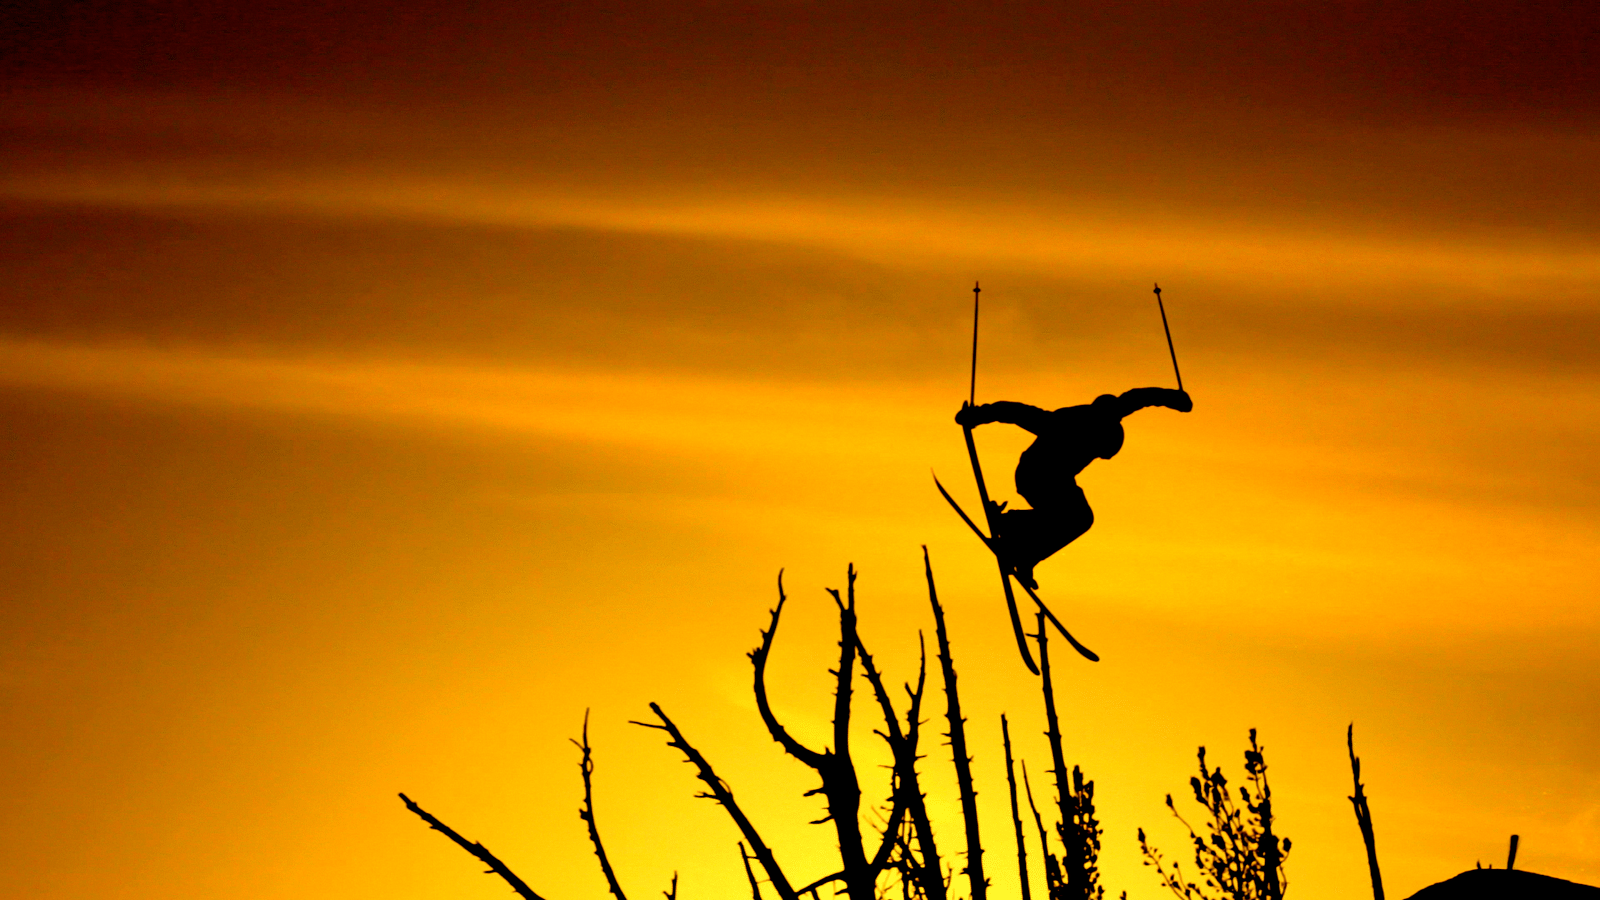 Silhouette at Sunset